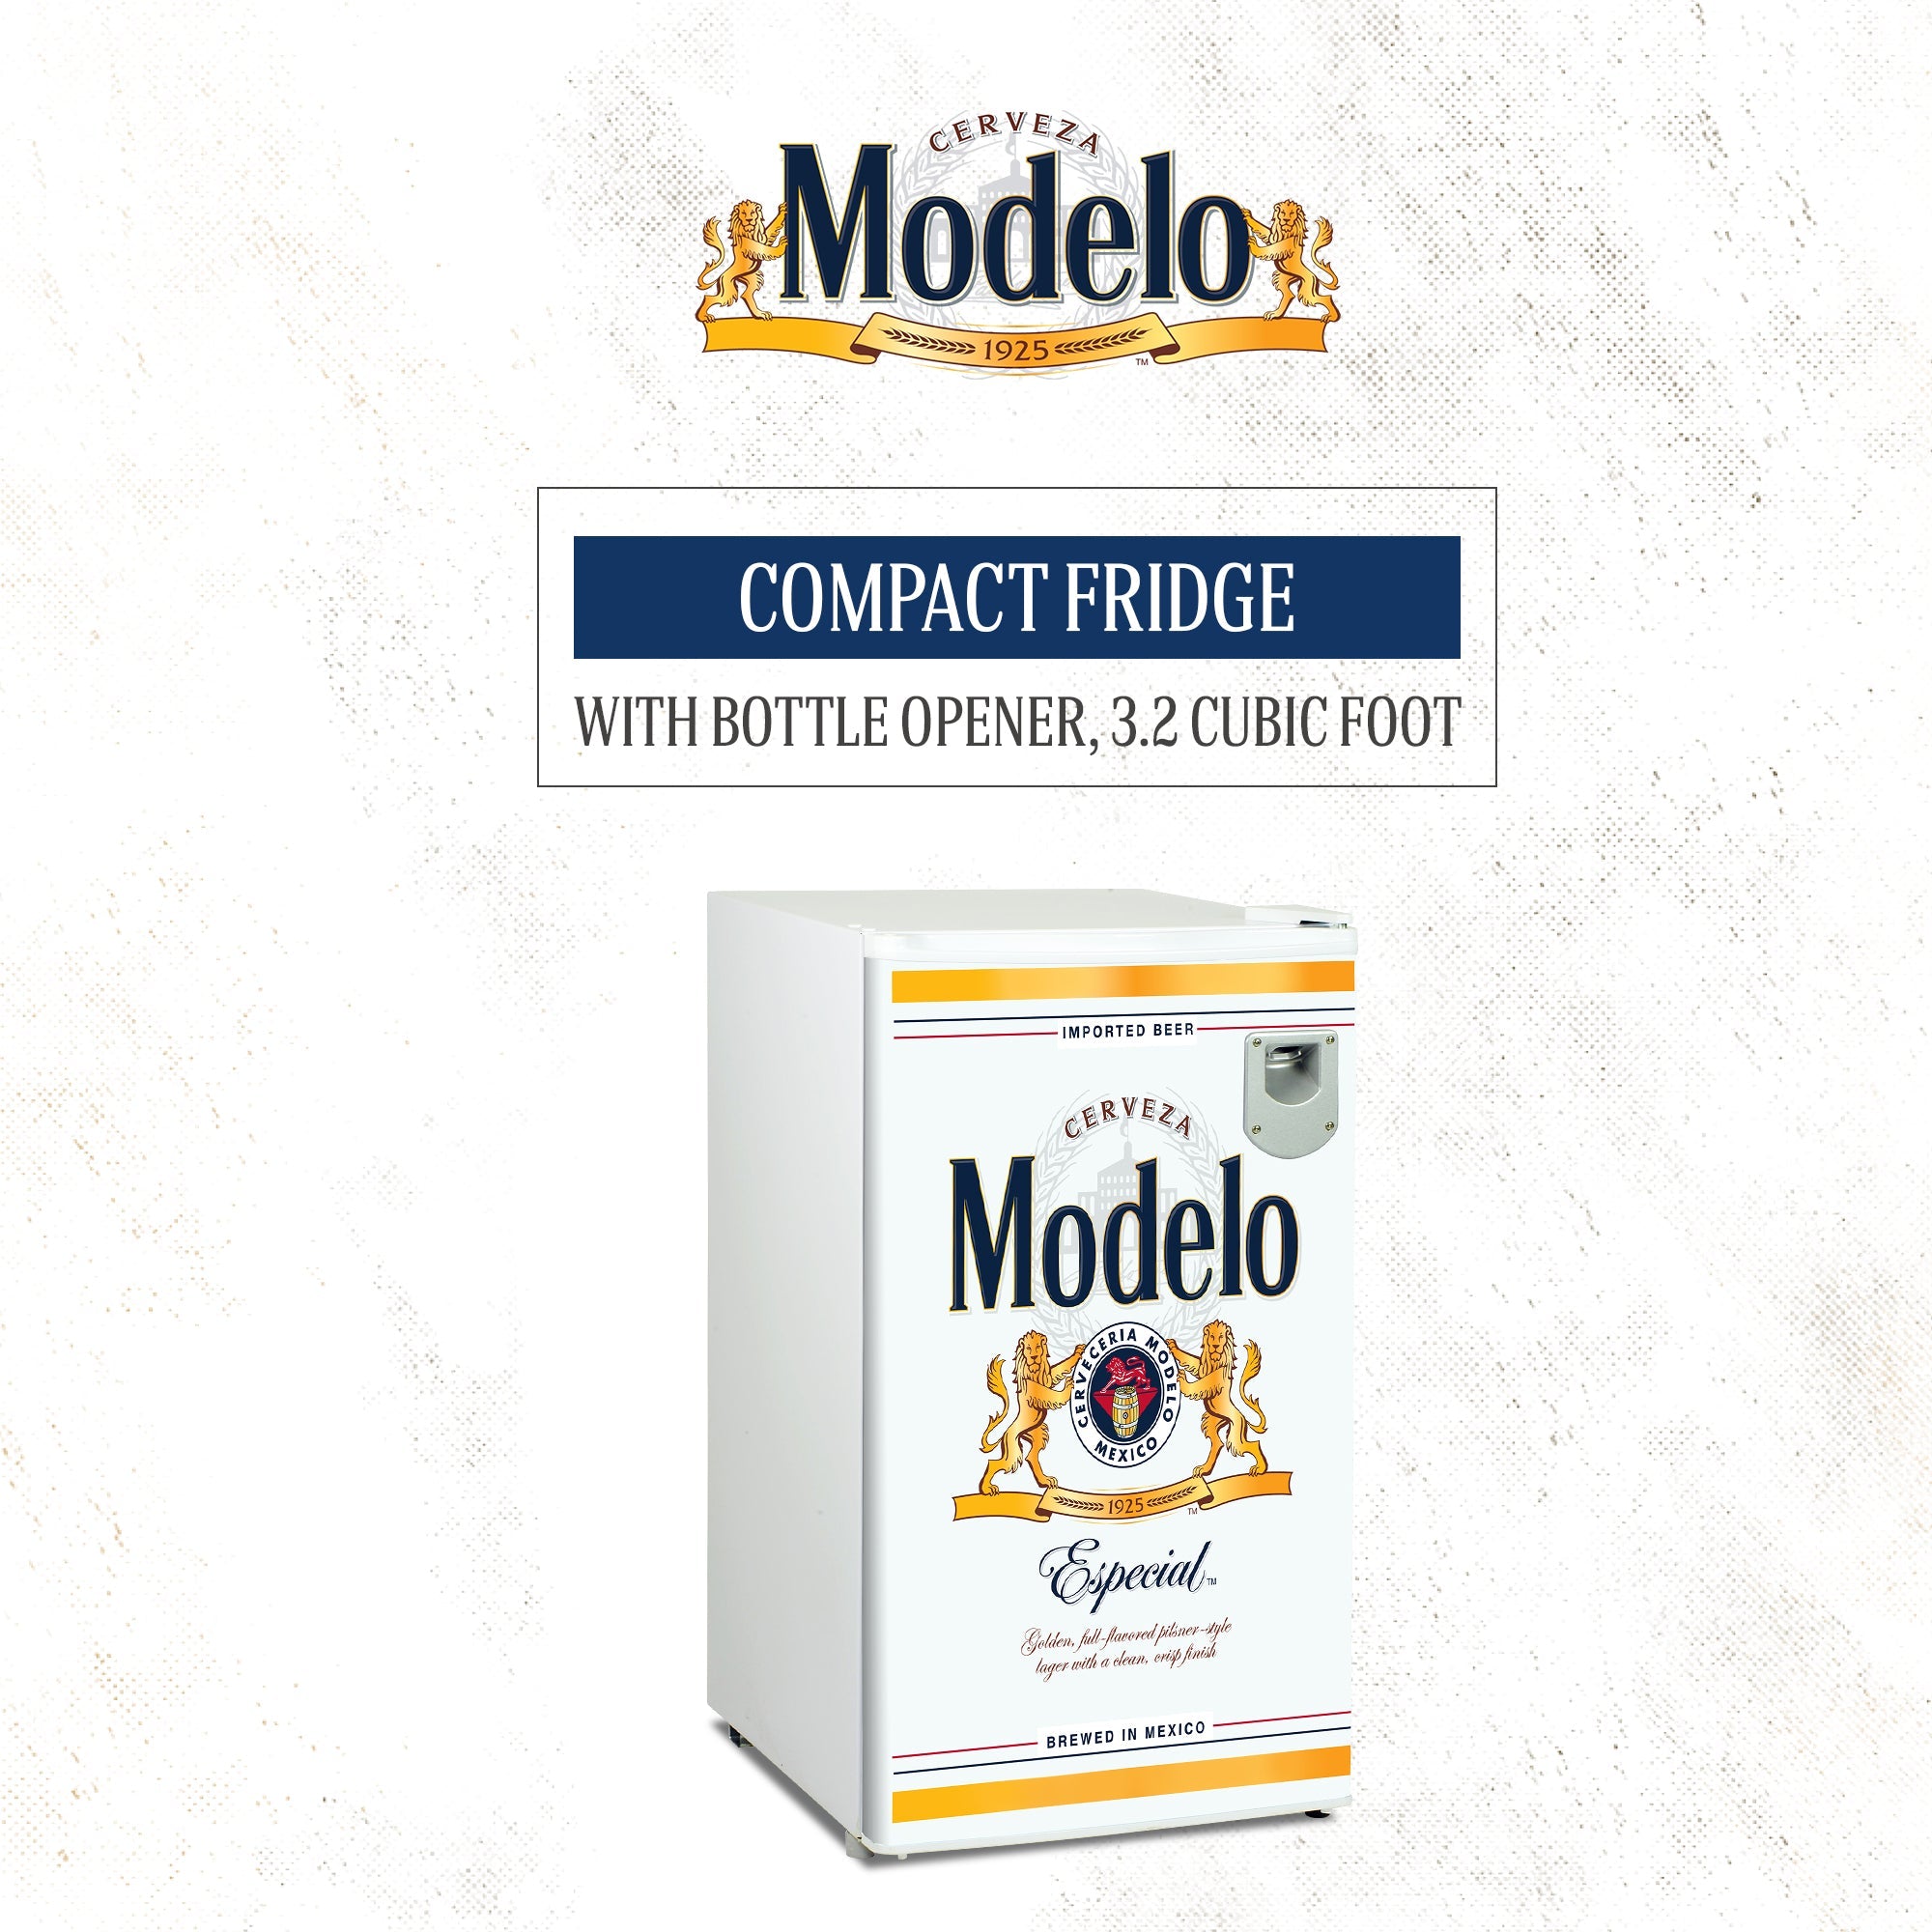 Product shot of compact fridge, closed, on a white background with a marbled effect. Above the fridge is the Modelo Cerveza logo and text reading, "Compact fridge with bottle opener, 3.2 cubic feet"